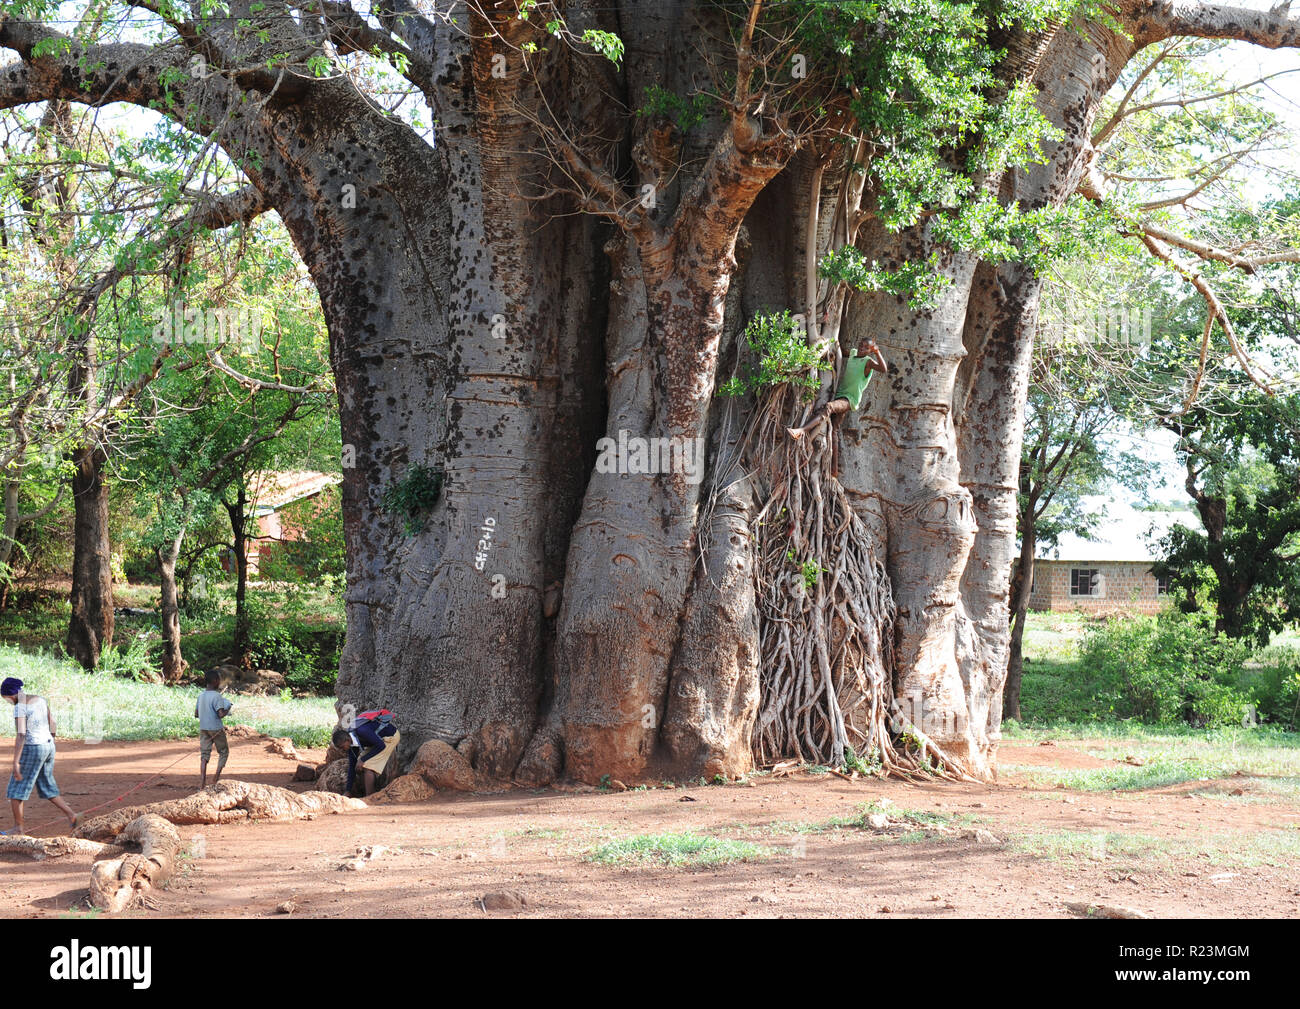 Iconic tourism roadside venue on Moshi Road in Tanzania, being an ancient landmark of huge baobab tree over 400 years old visitors photographic sight. Stock Photo